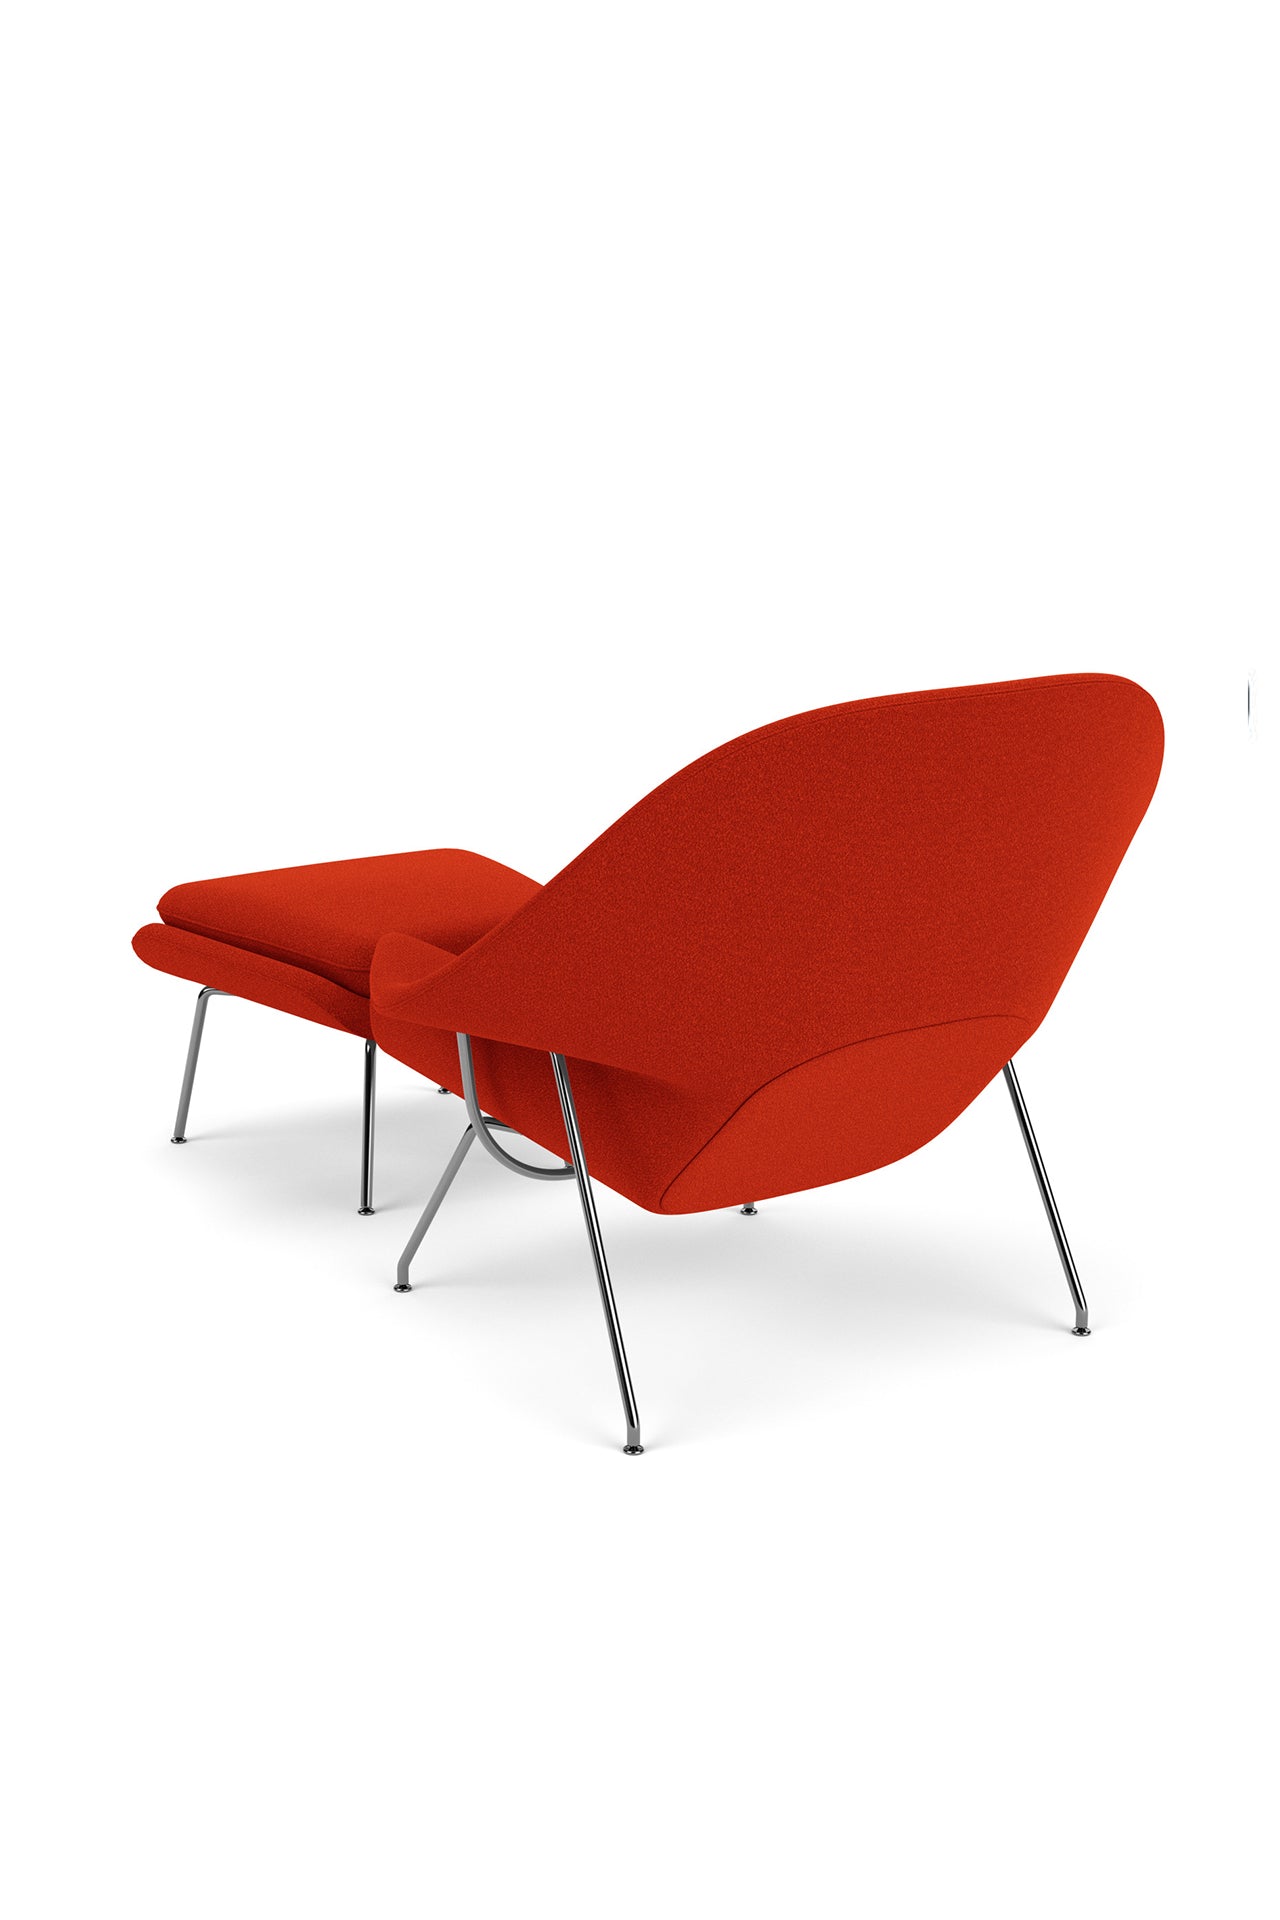 Knoll Womb Chair With Ottoman Designed By Eero Saarinen in Crimson Red - Back Image (6606269907059)